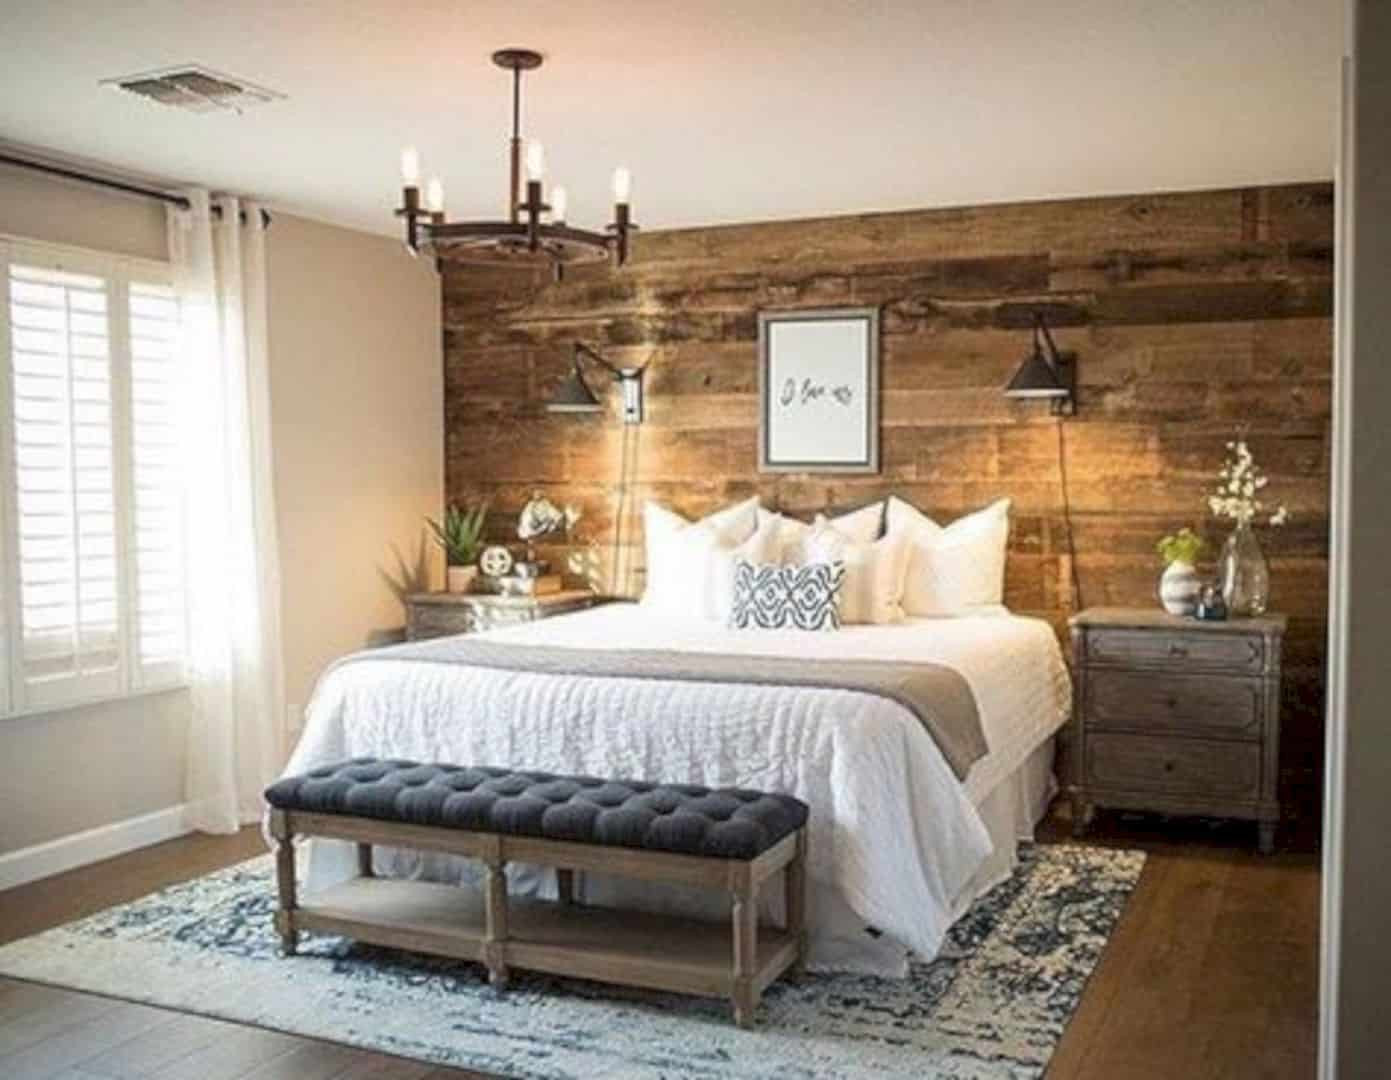 Rustic Bedroom Wall Decor
 DIY Rustic Wall Décor Ideas for a Countryside themed Room